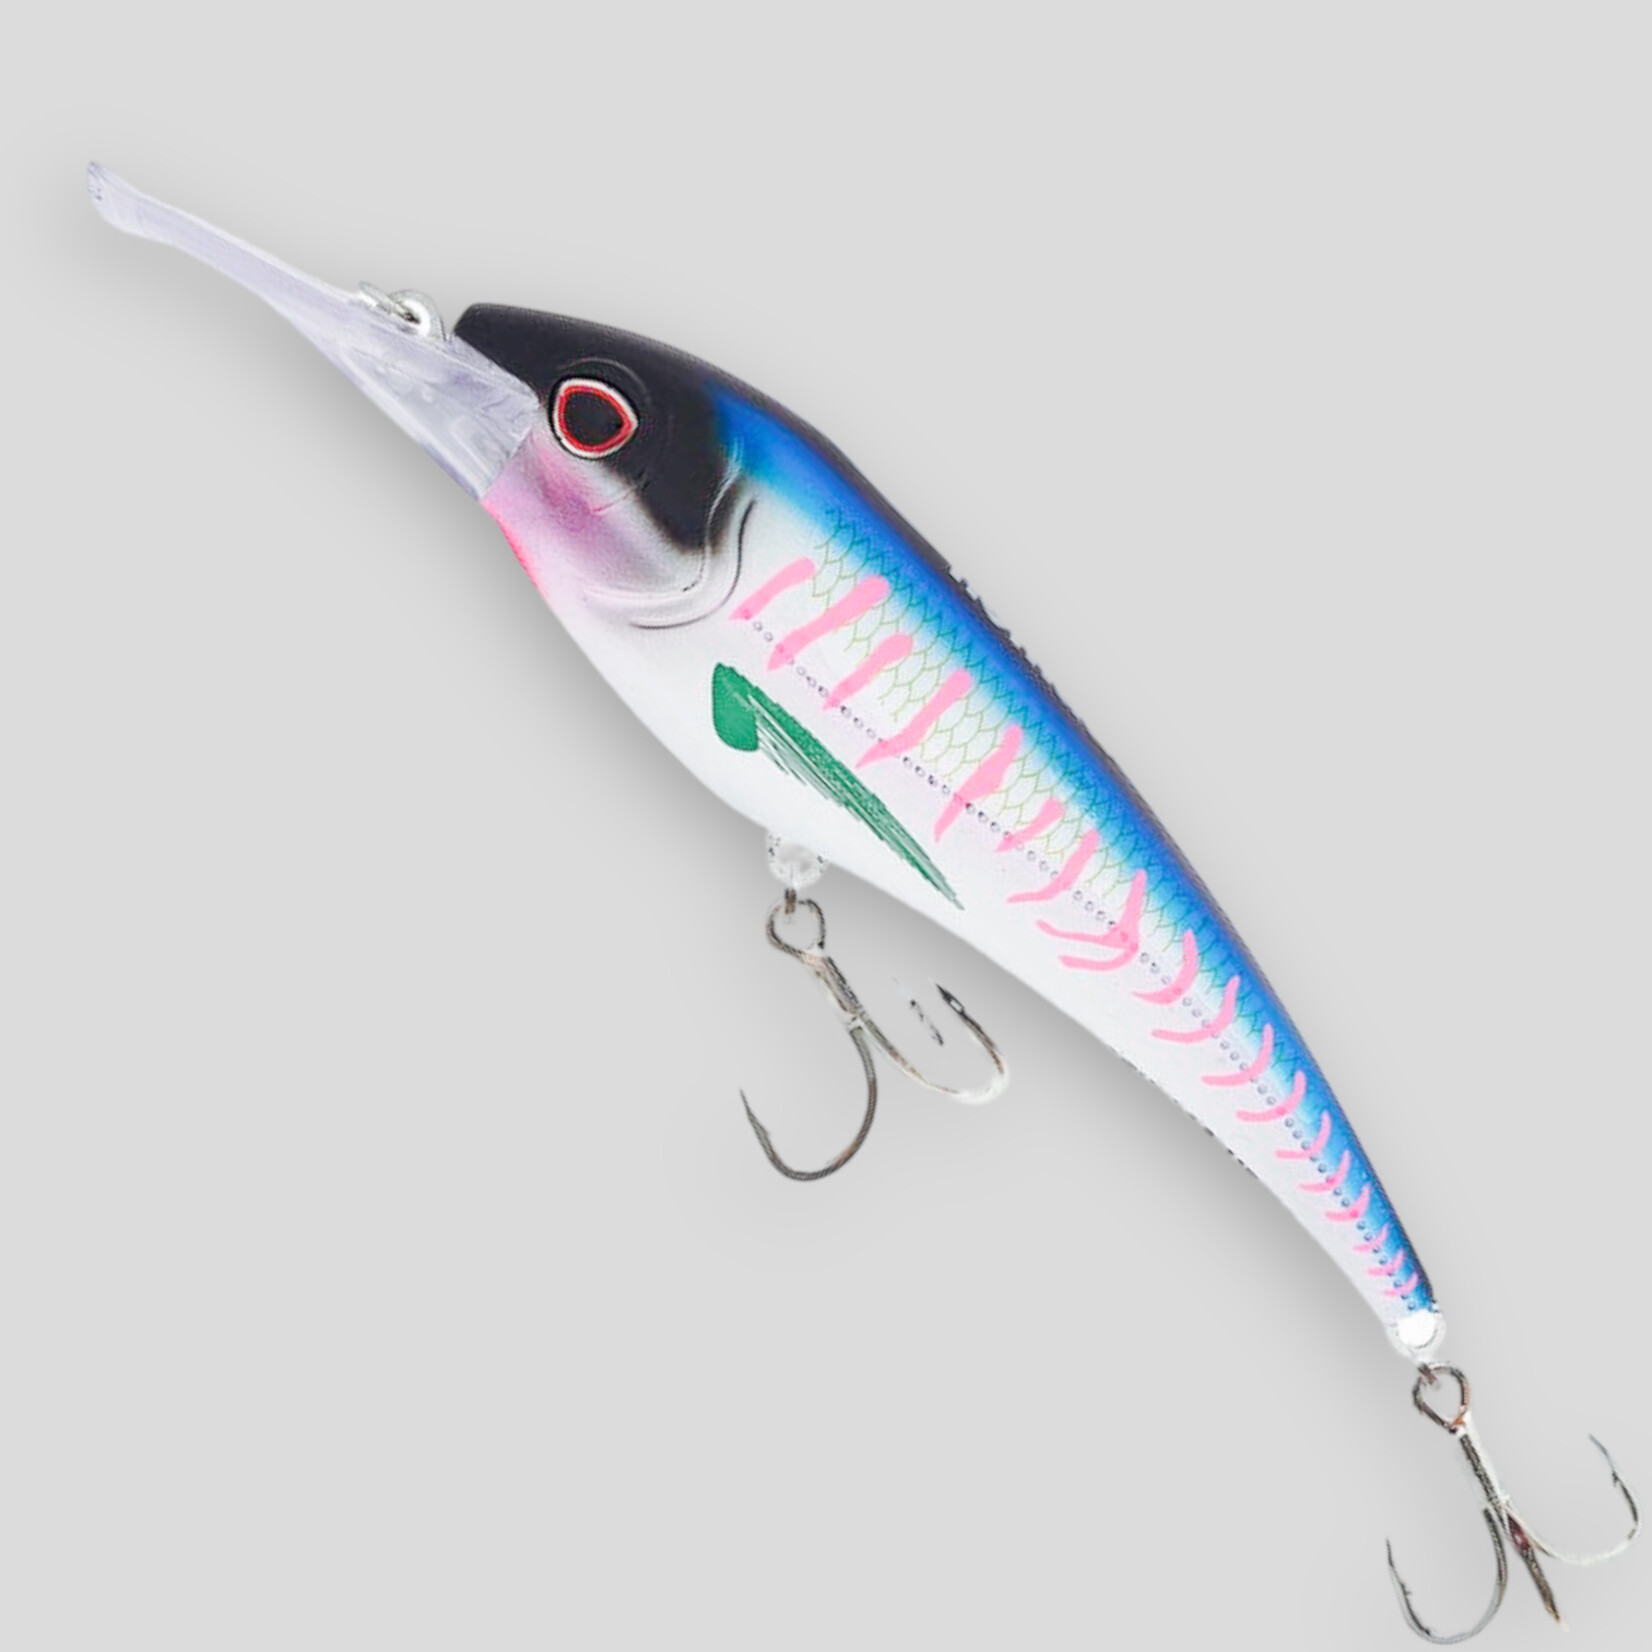 Nomad Nomad DTX Minnow Shallow